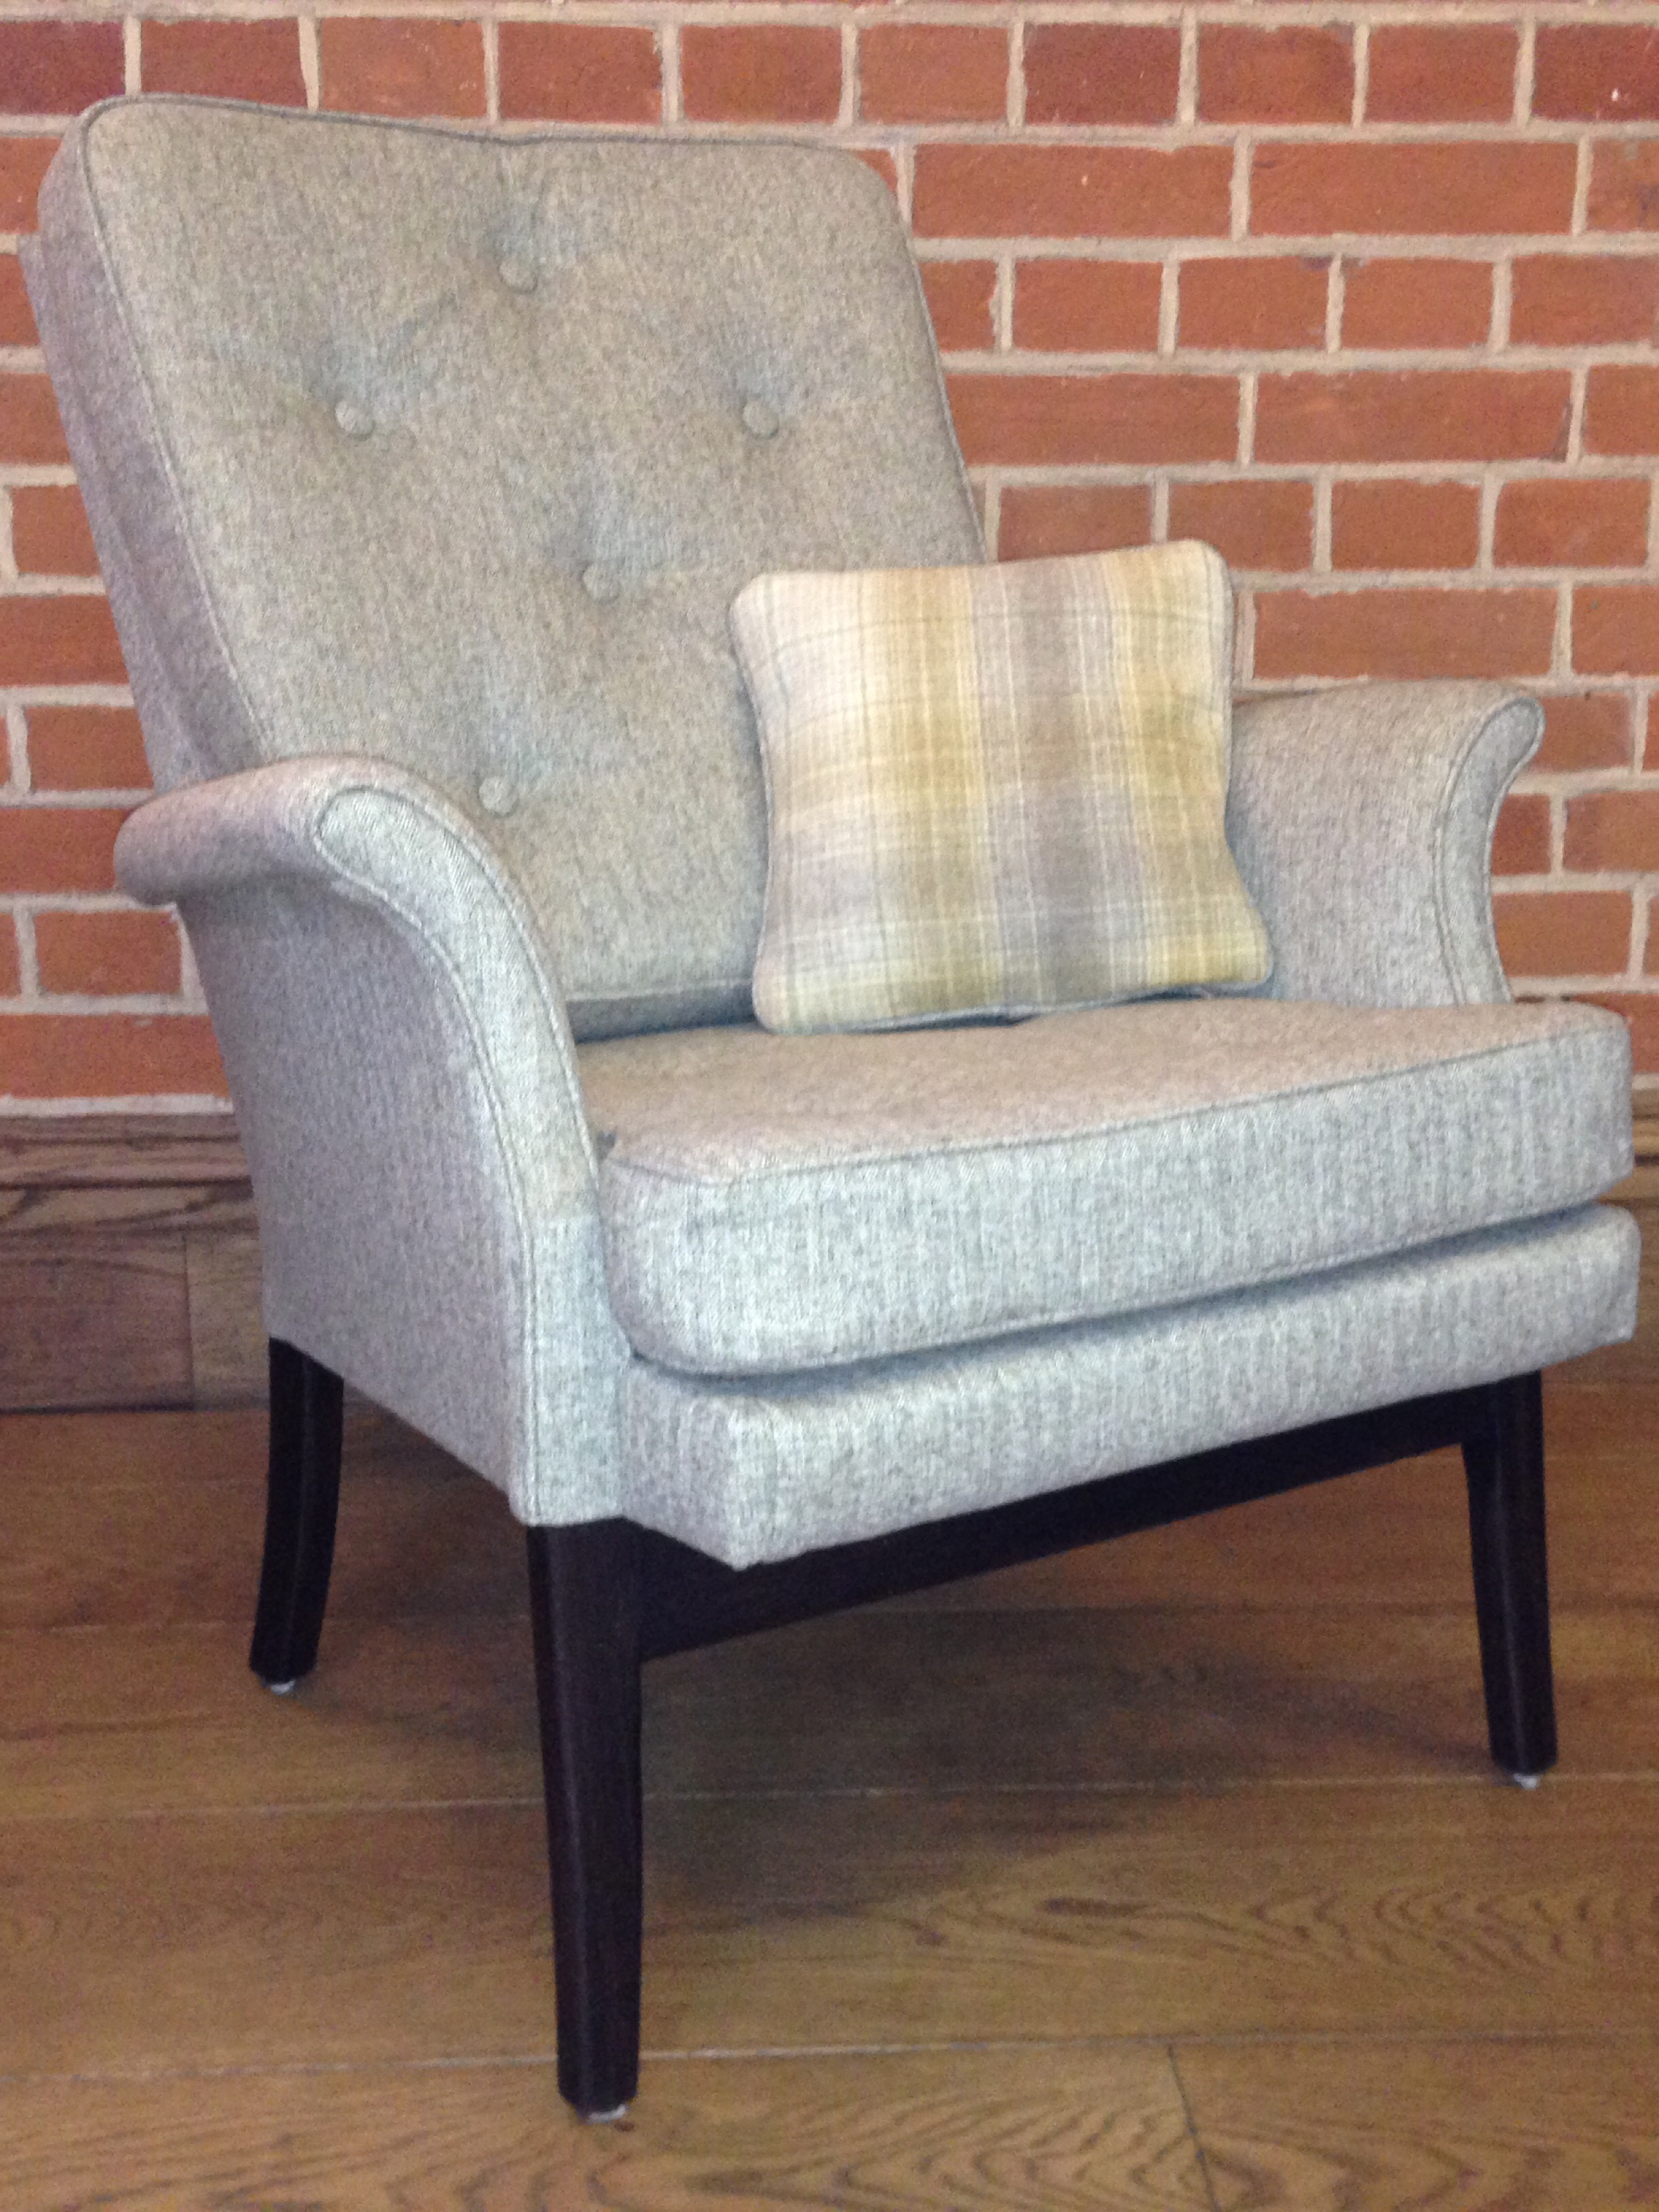 1954 Parker Knoll Reading Chair